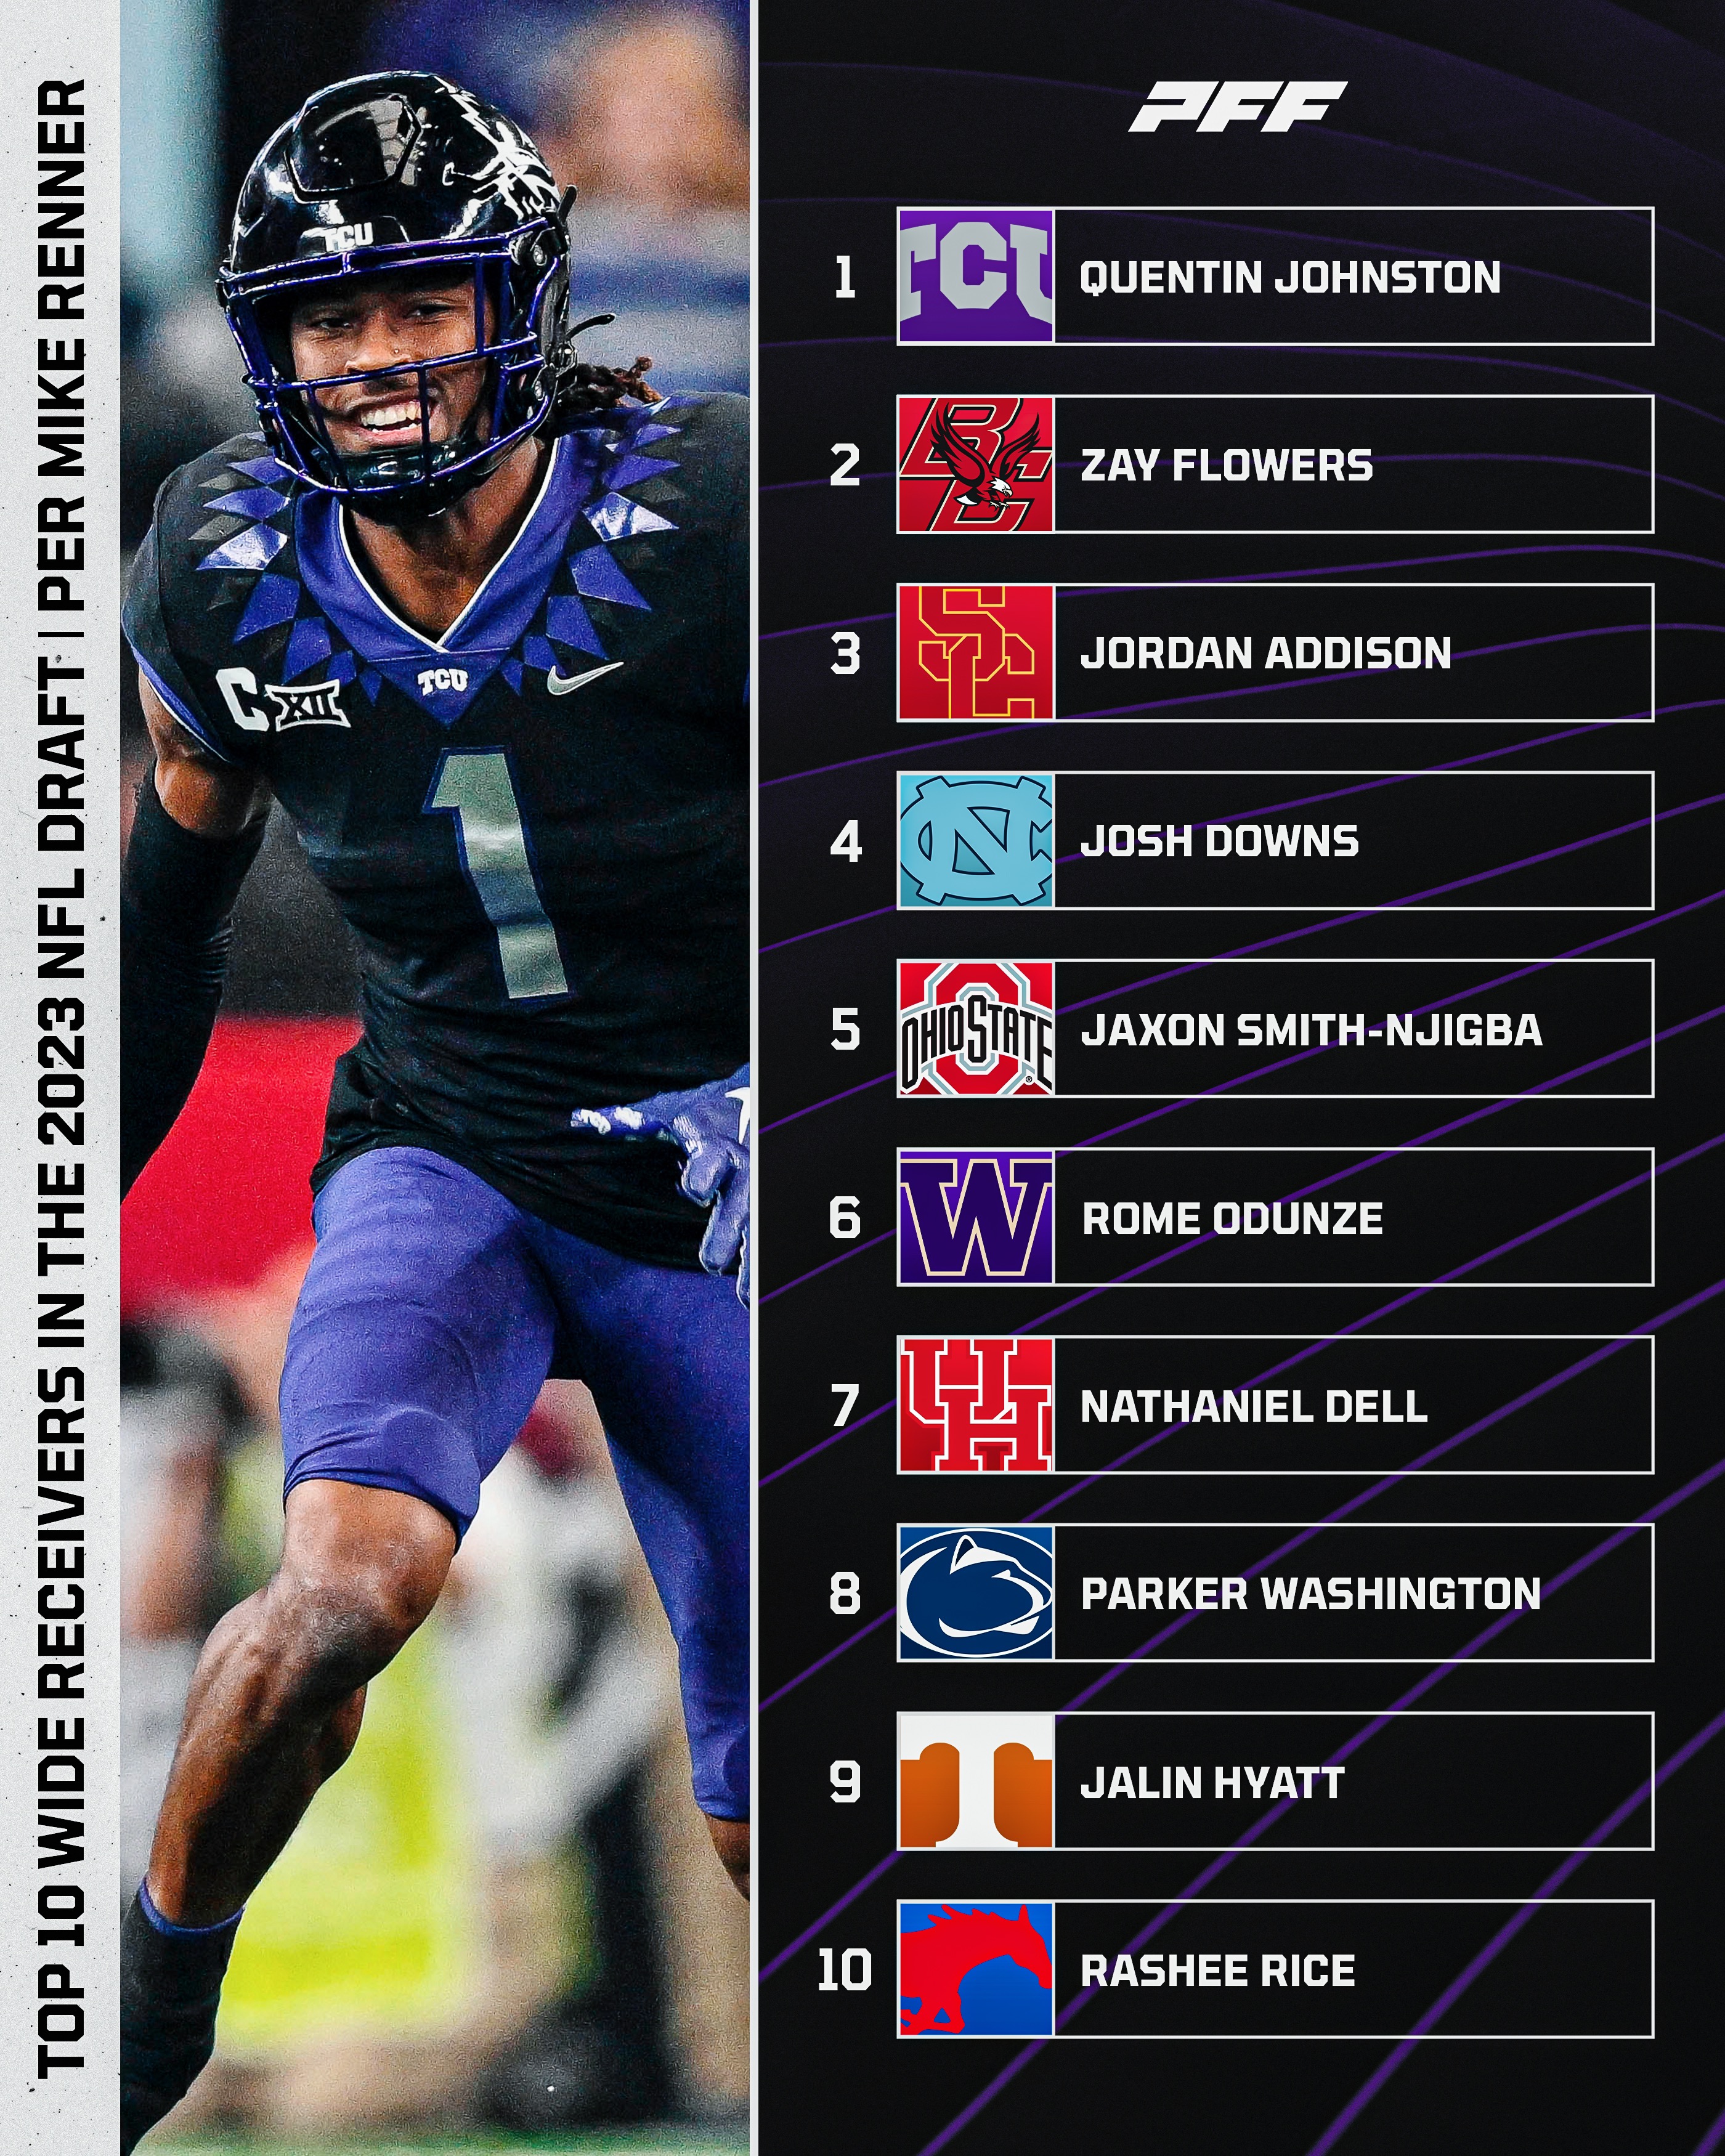 PFF ranks the top 10 wide receivers in college football for 2022